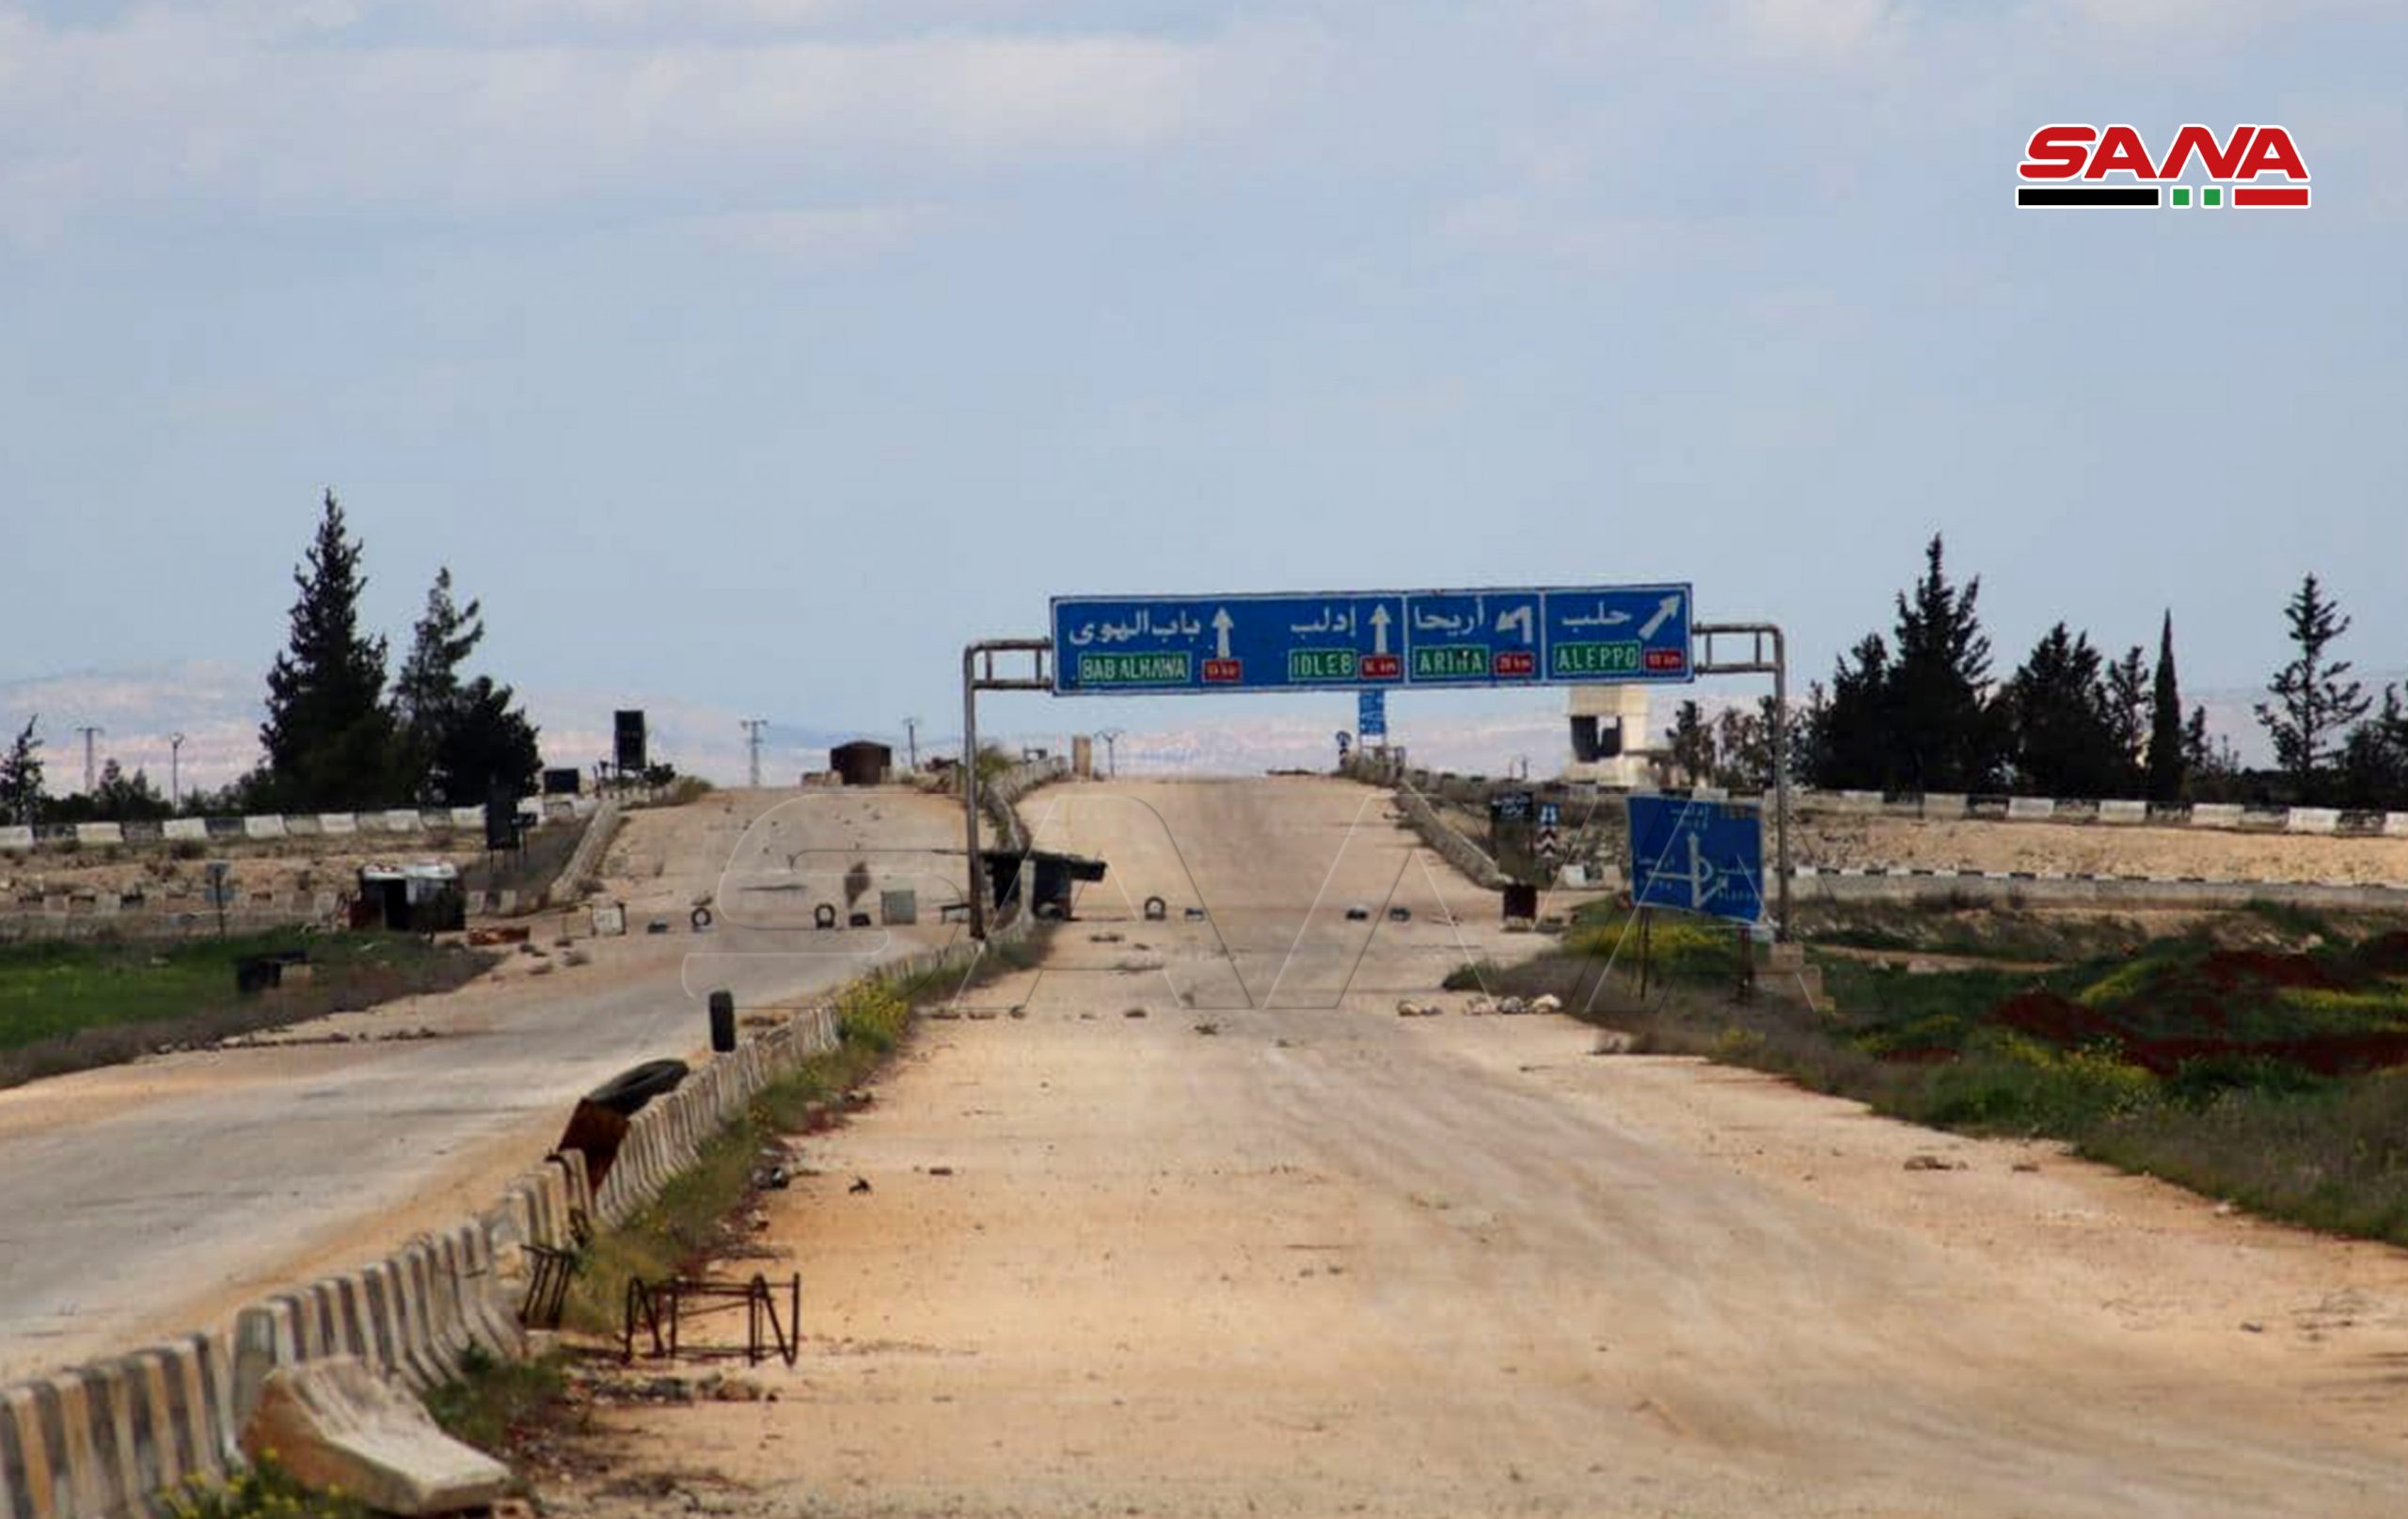 Opening of Crossings Between Regime Areas and North: Who Benefits the Most?